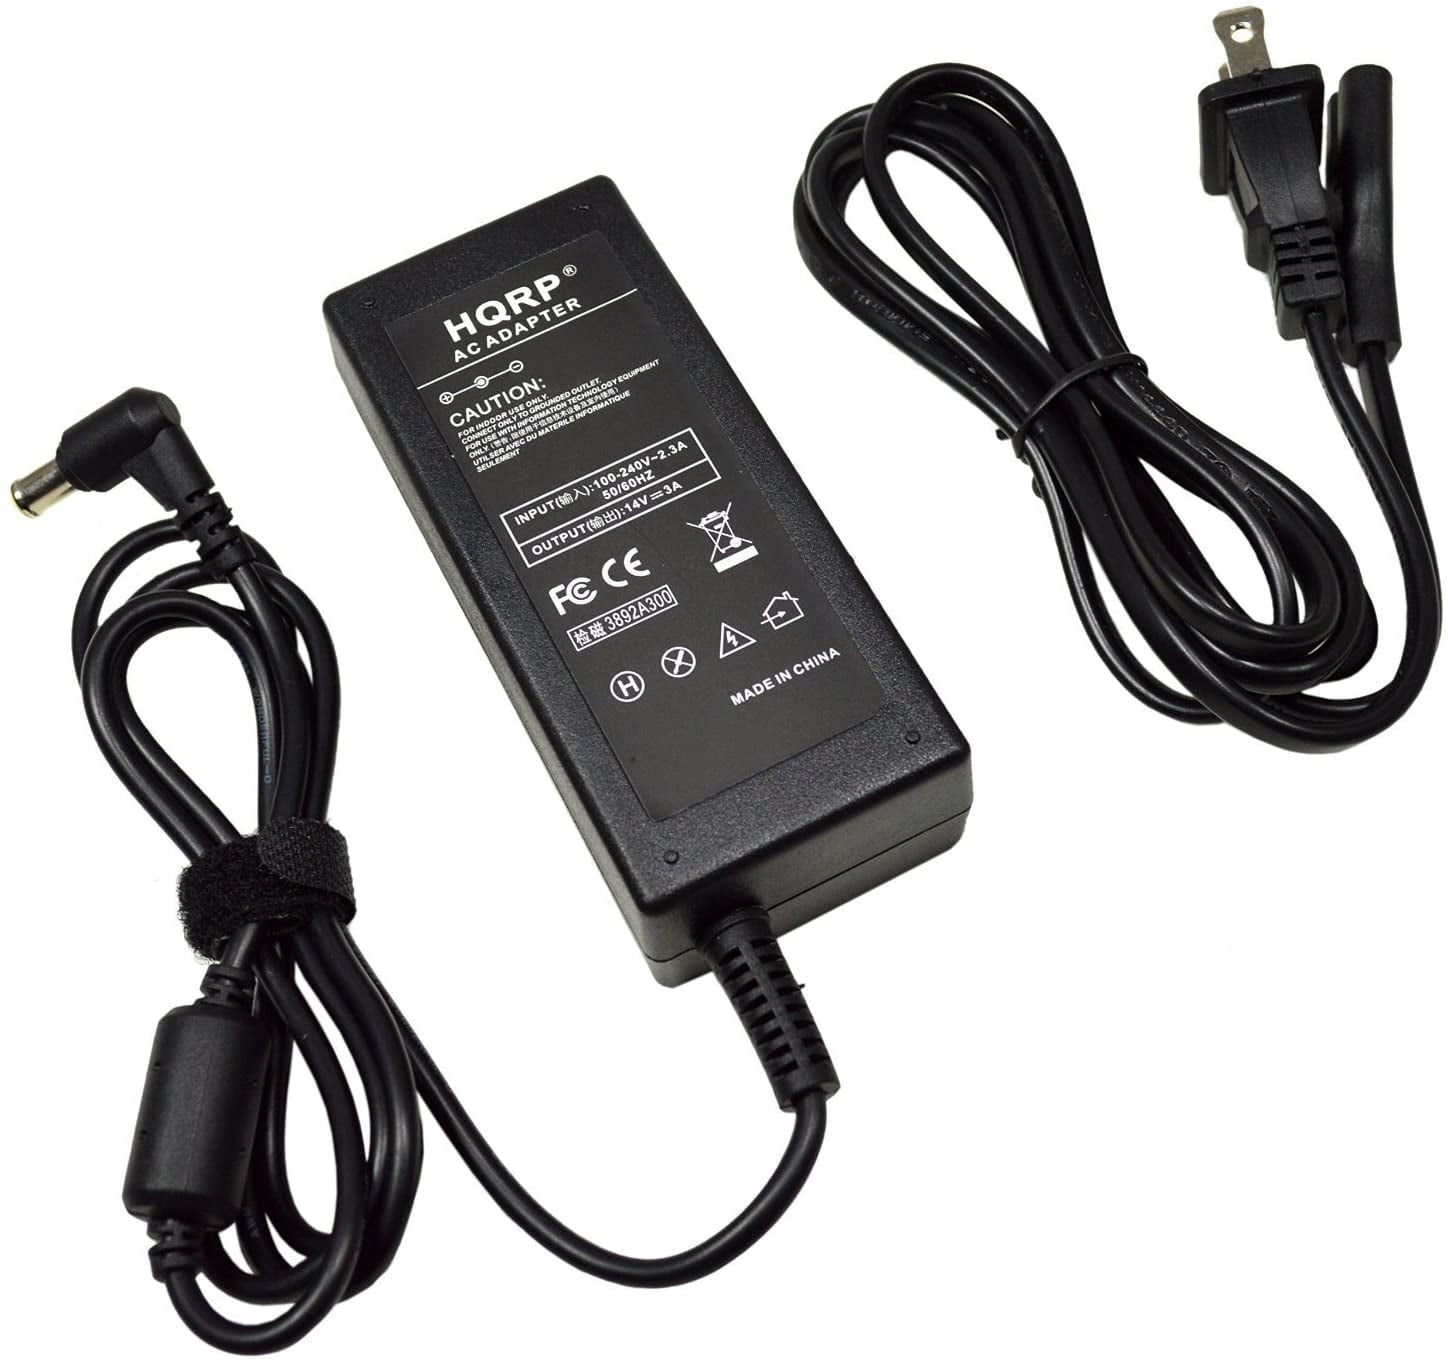 12V 3A Mains AC-DC Adaptor Power Supply for Samsung SyncMaster P2370 LCD Monitor